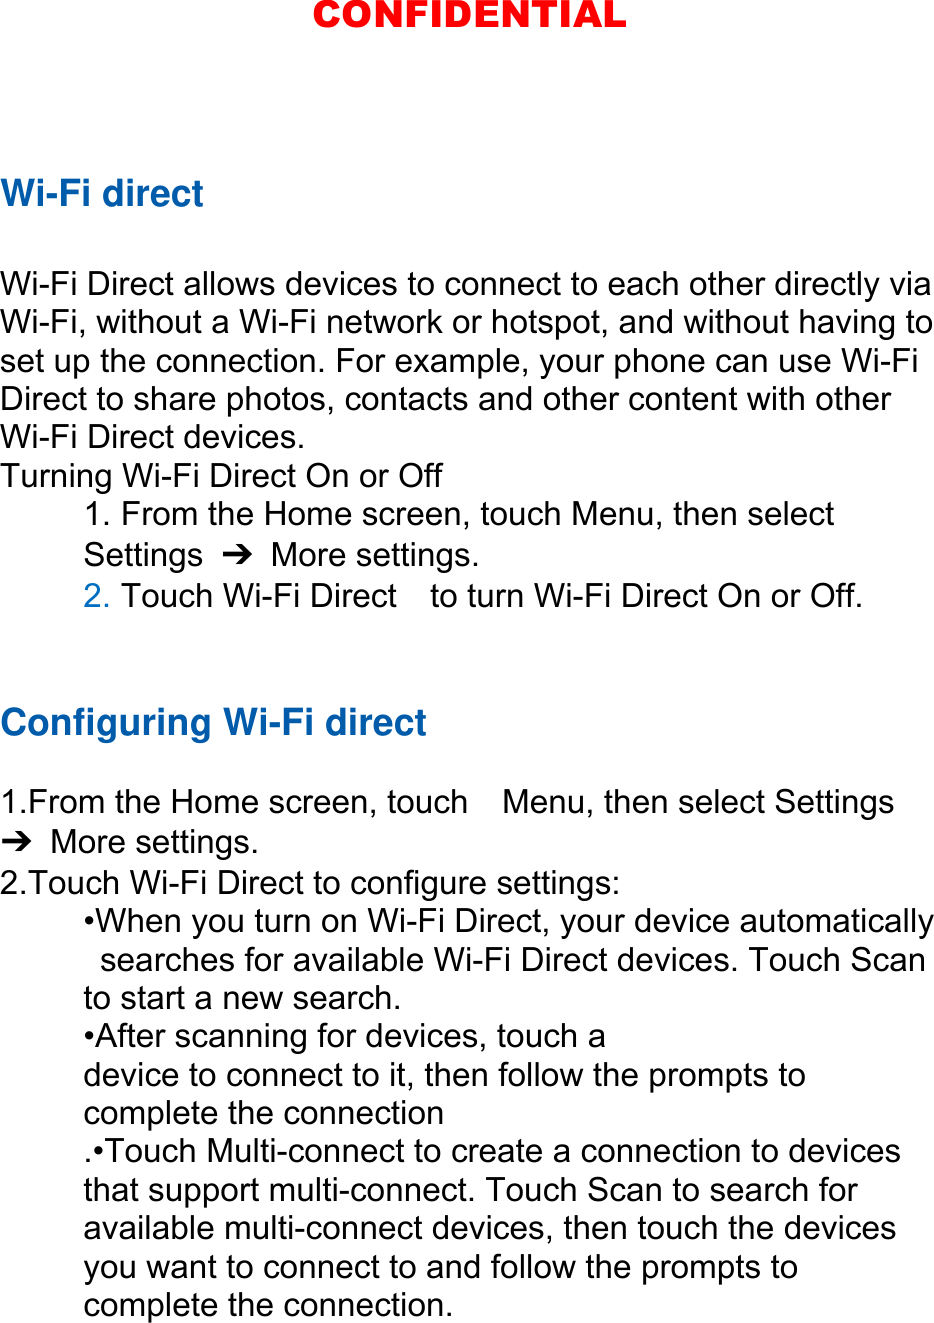 Wi-Fi direct  Wi-Fi Direct allows devices to connect to each other directly via Wi-Fi, without a Wi-Fi network or hotspot, and without having to set up the connection. For example, your phone can use Wi-Fi Direct to share photos, contacts and other content with other Wi-Fi Direct devices.   Turning Wi-Fi Direct On or Off 1. From the Home screen, touch Menu, then select   Settings  ➔ More settings. 2. Touch Wi-Fi Direct    to turn Wi-Fi Direct On or Off.   Configuring Wi-Fi direct   1.From the Home screen, touch    Menu, then select Settings ➔ More settings. 2.Touch Wi-Fi Direct to configure settings:   •When you turn on Wi-Fi Direct, your device automatically   searches for available Wi-Fi Direct devices. Touch Scan   to start a new search. •After scanning for devices, touch a   device to connect to it, then follow the prompts to   complete the connection .•Touch Multi-connect to create a connection to devices that support multi-connect. Touch Scan to search for available multi-connect devices, then touch the devices you want to connect to and follow the prompts to complete the connection.  CONFIDENTIAL